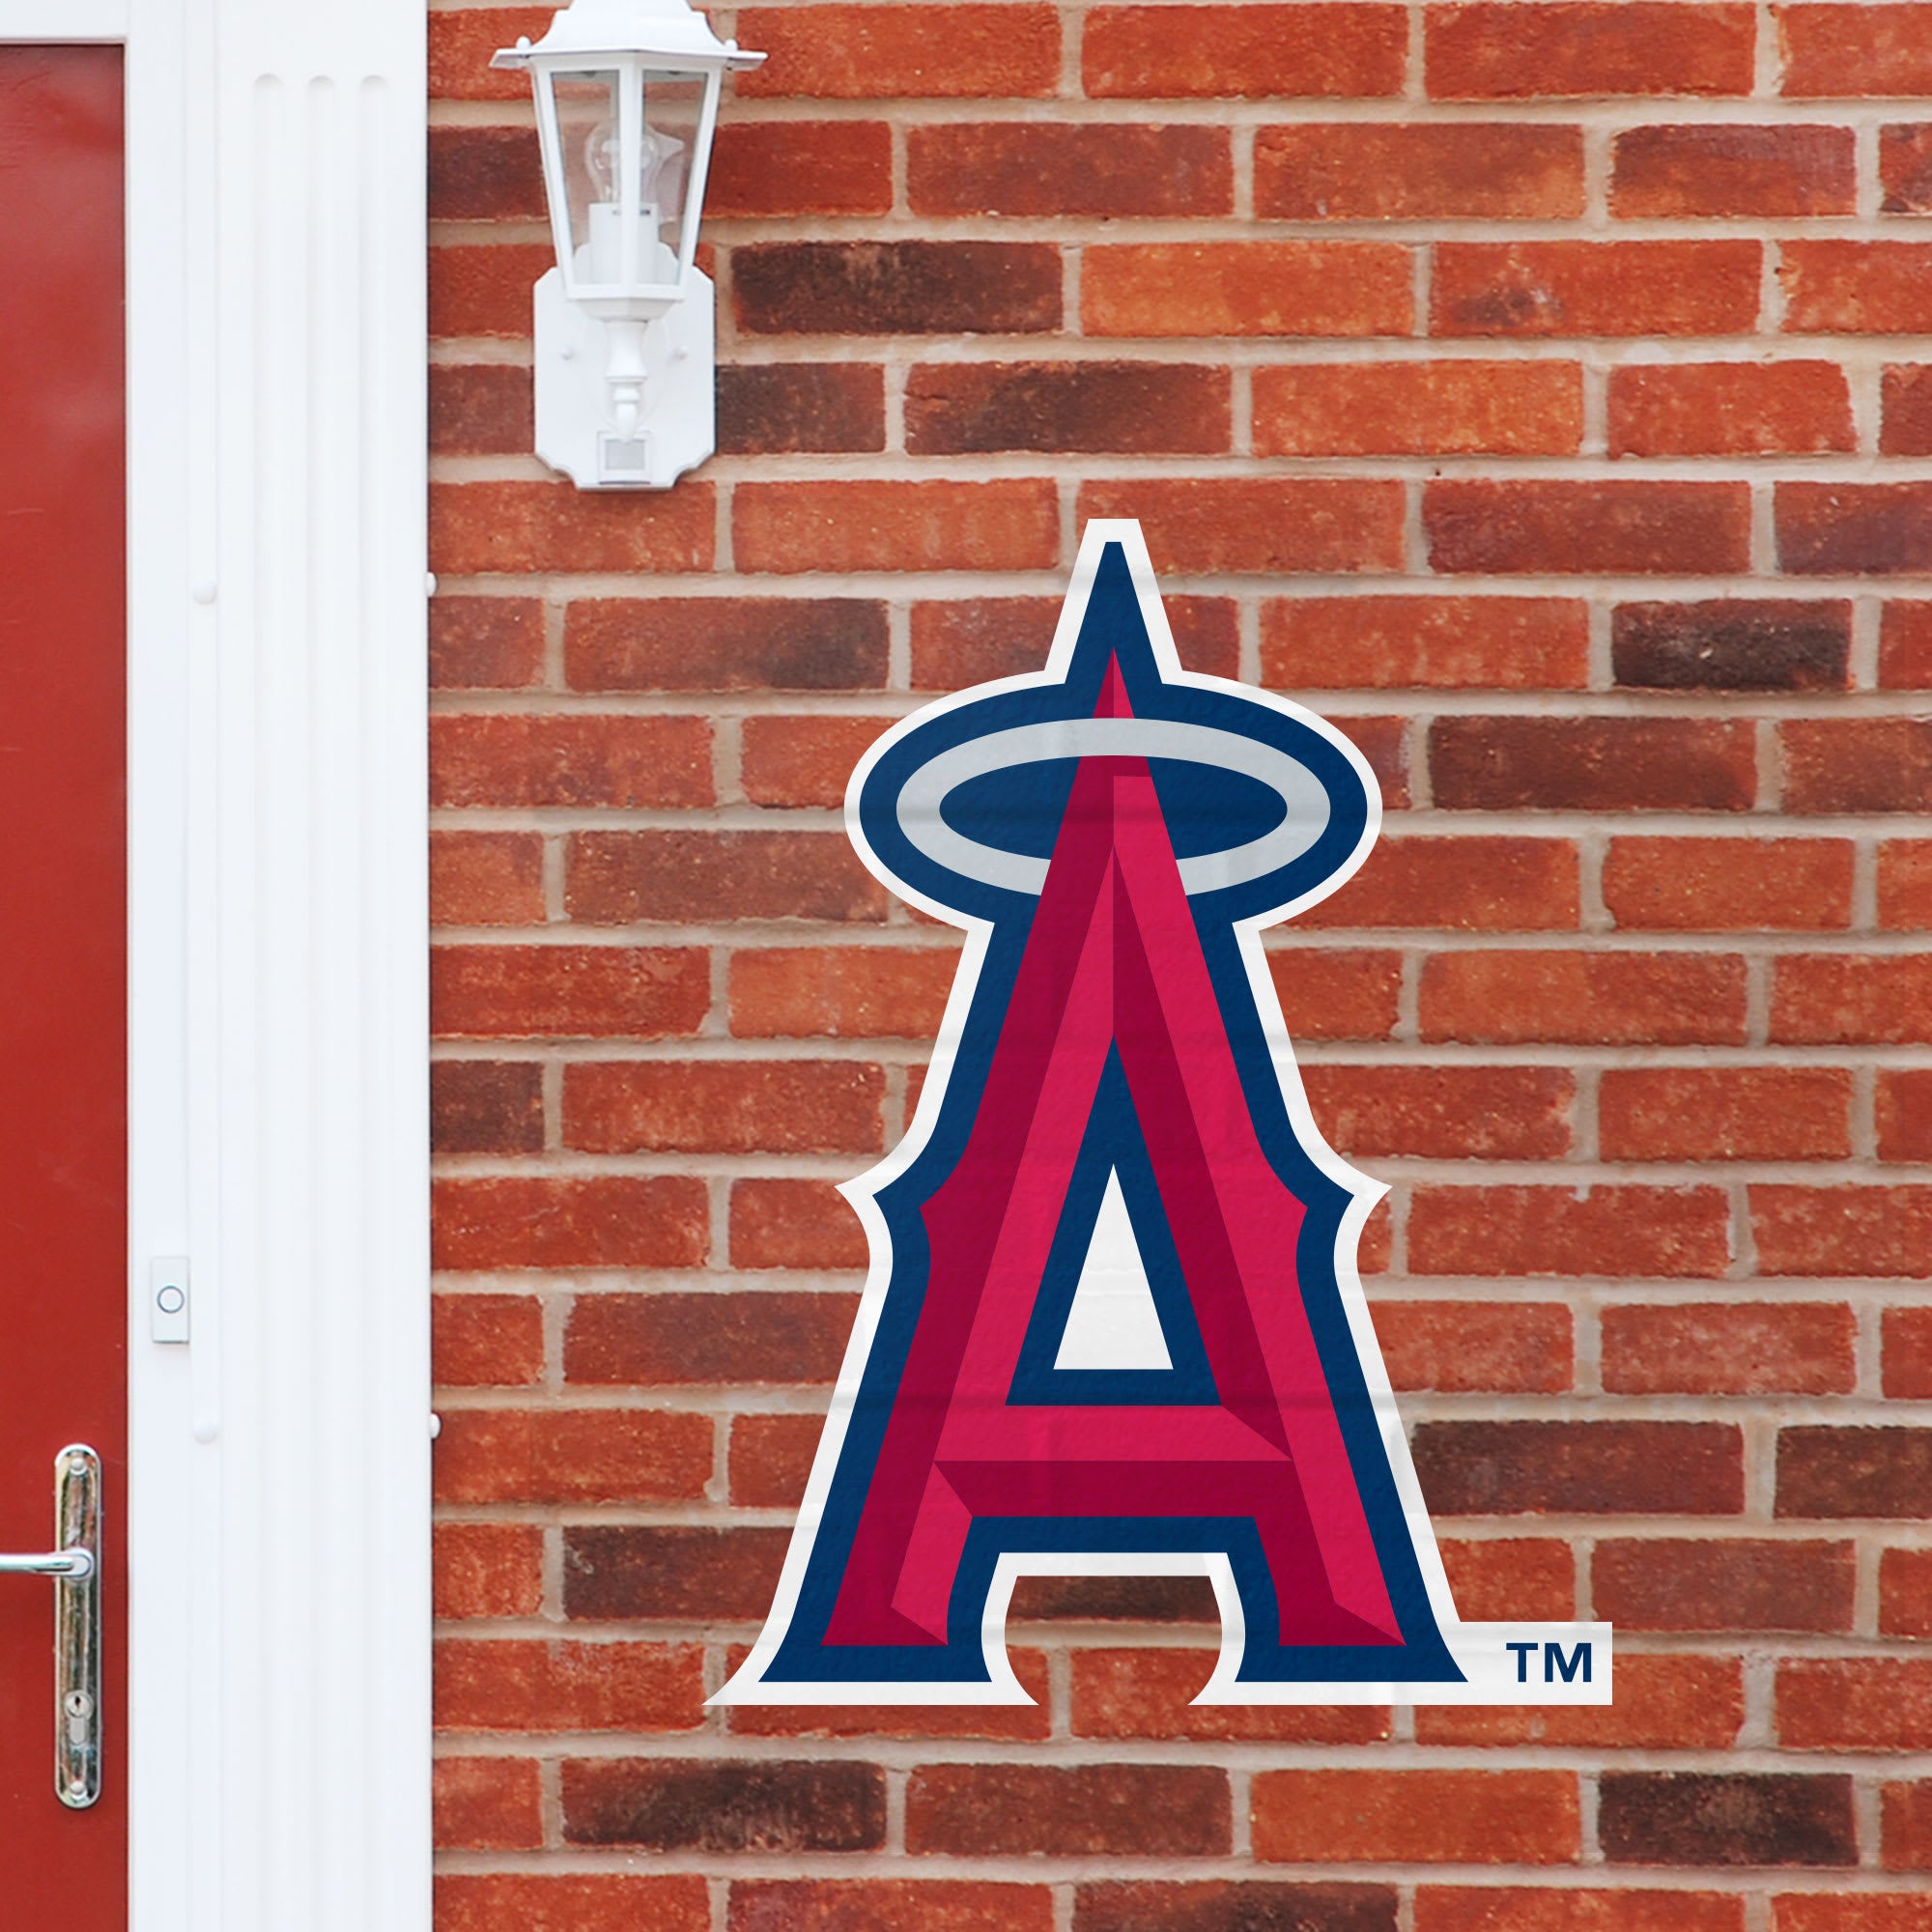 LA Angels: Logo - Officially Licensed MLB Outdoor Graphic Giant Logo (30"W x 30"H) by Fathead | Wood/Aluminum